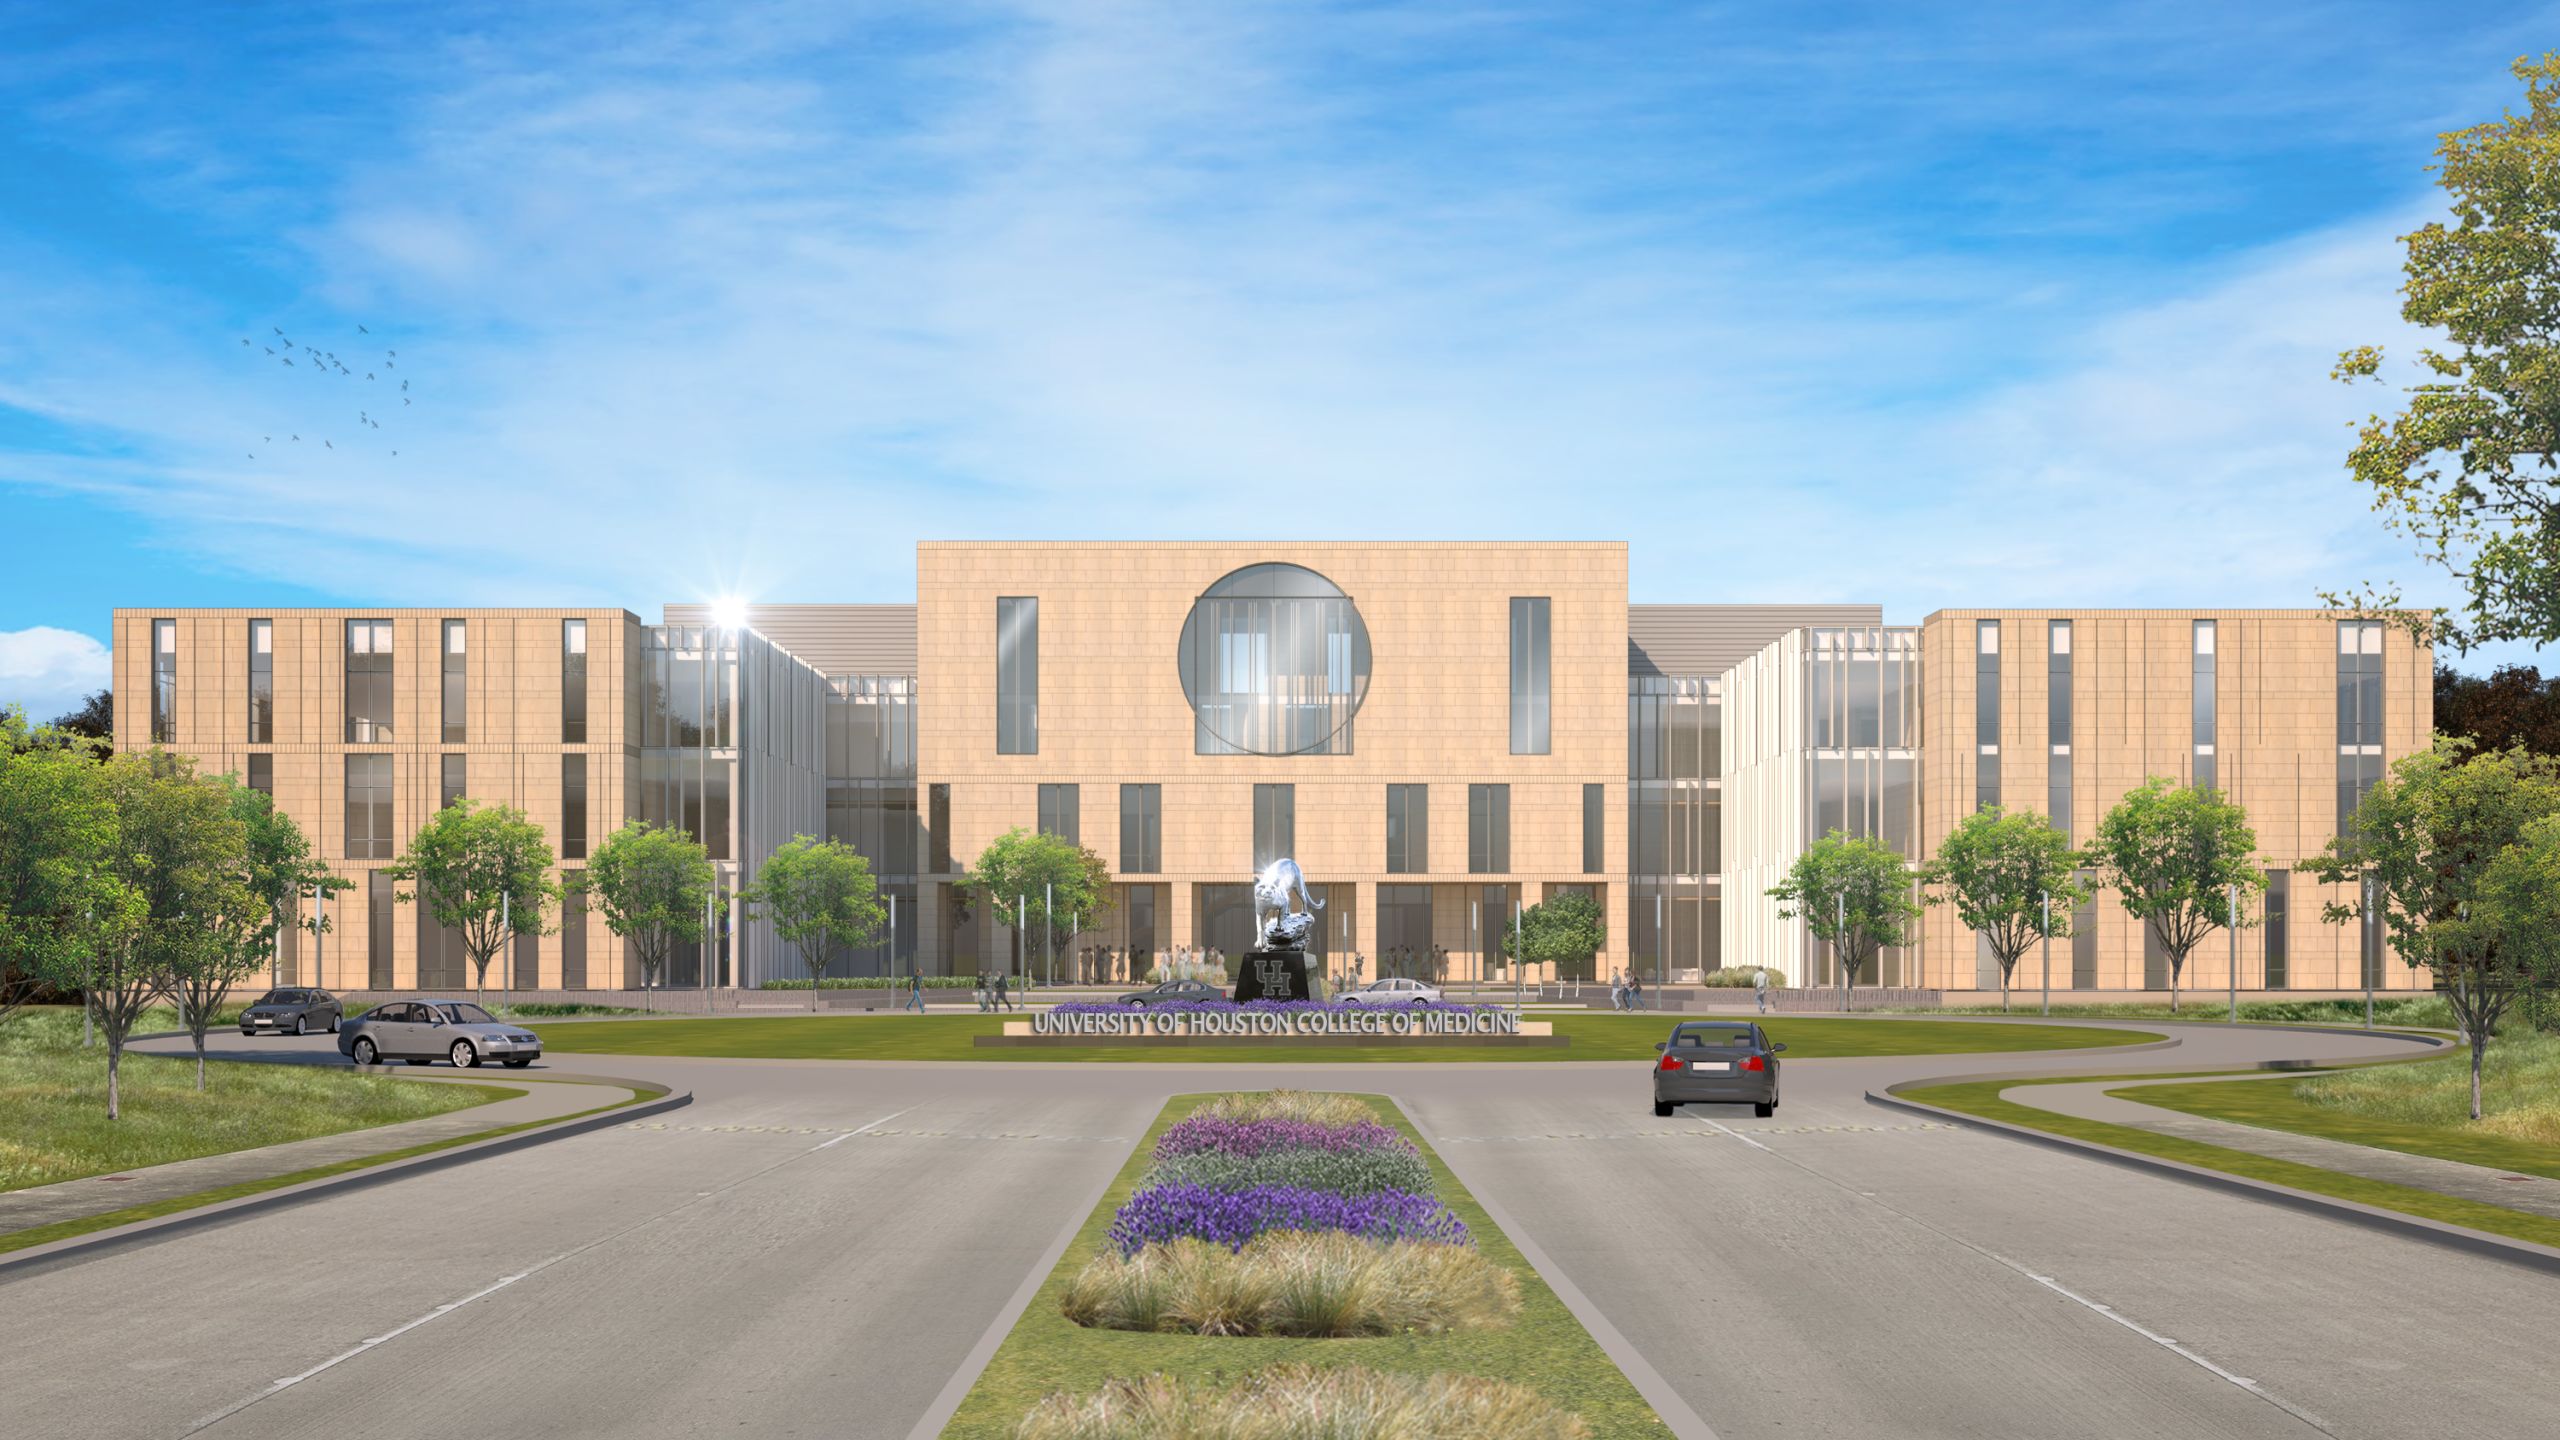 The $80 million College of Medicine building is slated to open in 2022.